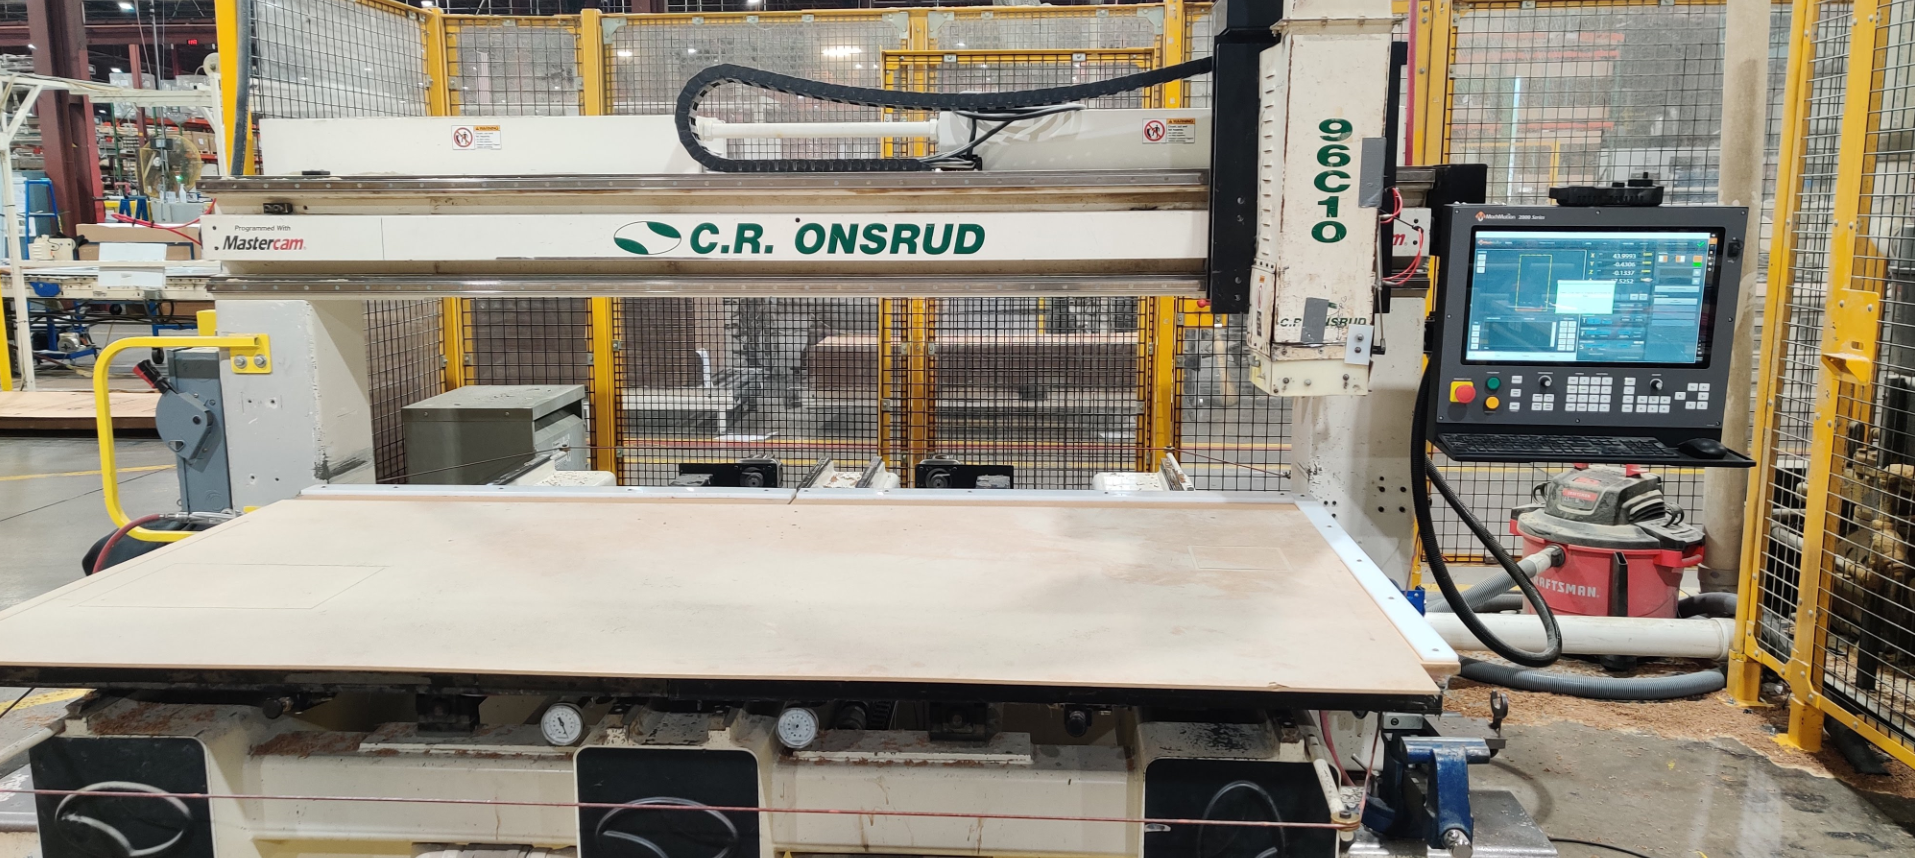 C.R> Onsrud Router with MachMotion CNC Control